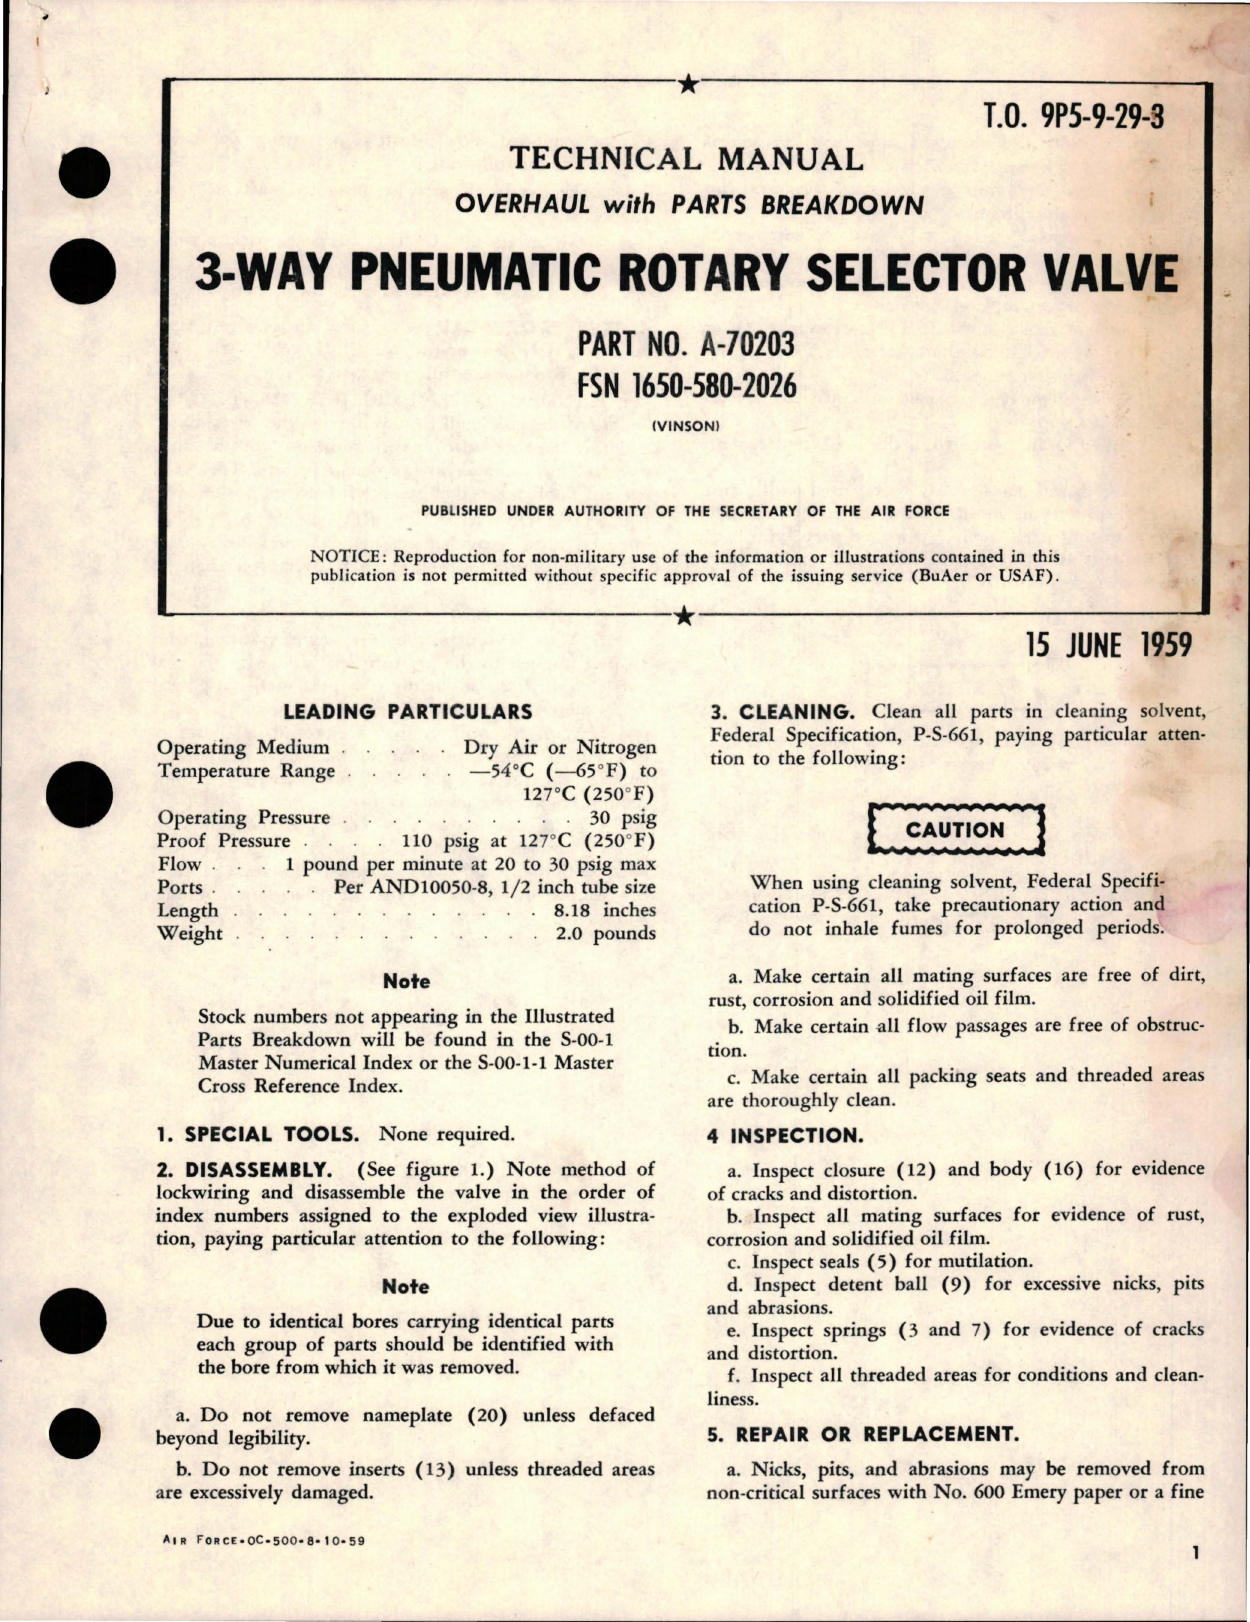 Sample page 1 from AirCorps Library document: Overhaul with Parts Breakdown for Pneumatic Rotary Selector Valve - 3-Way - Part A-70203